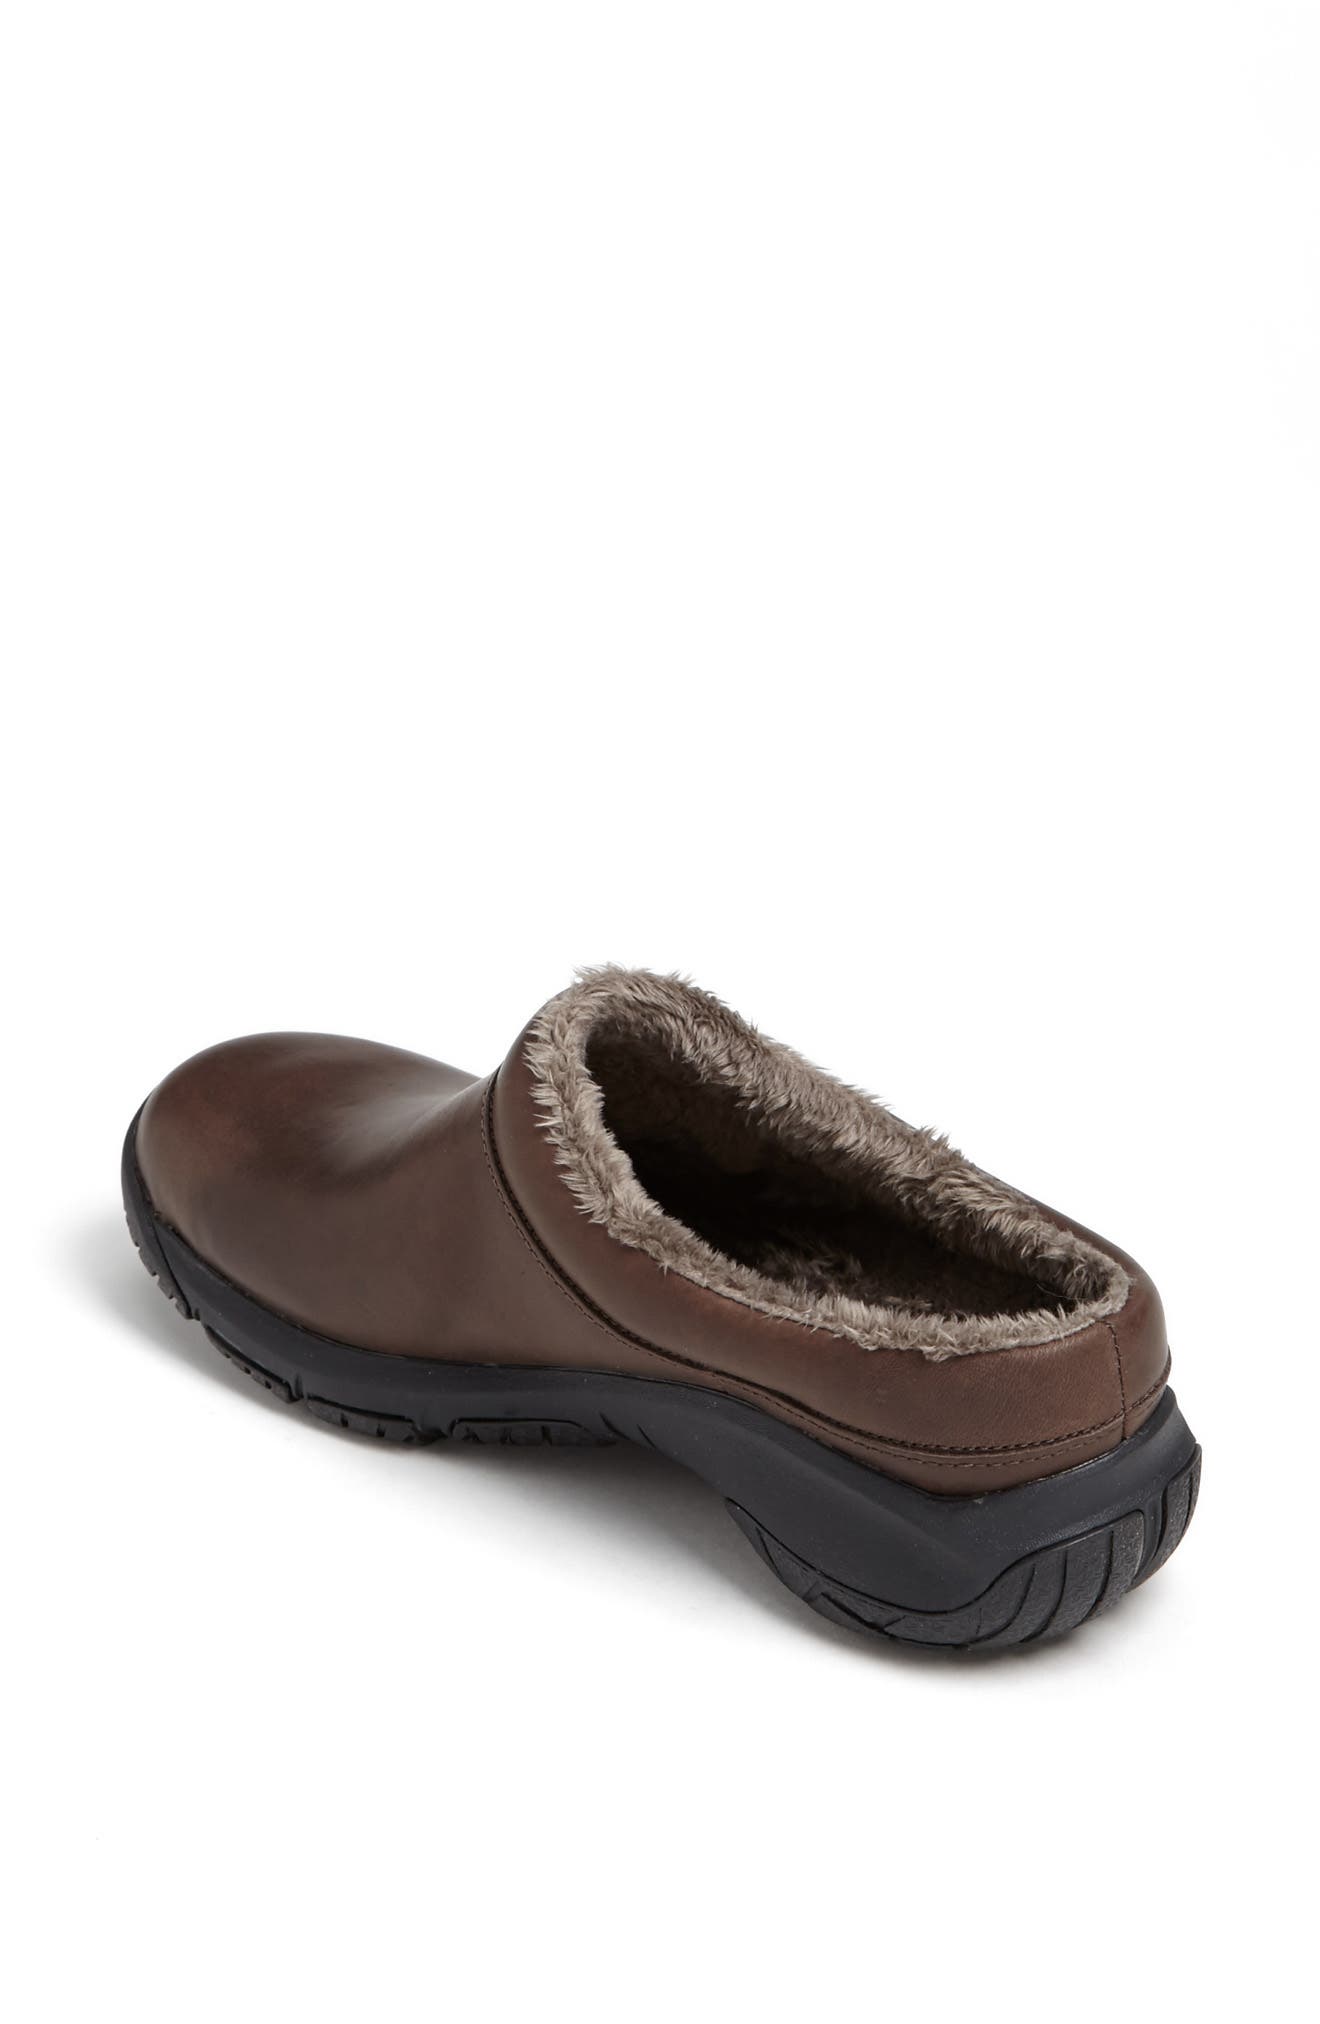 merrell lined clogs